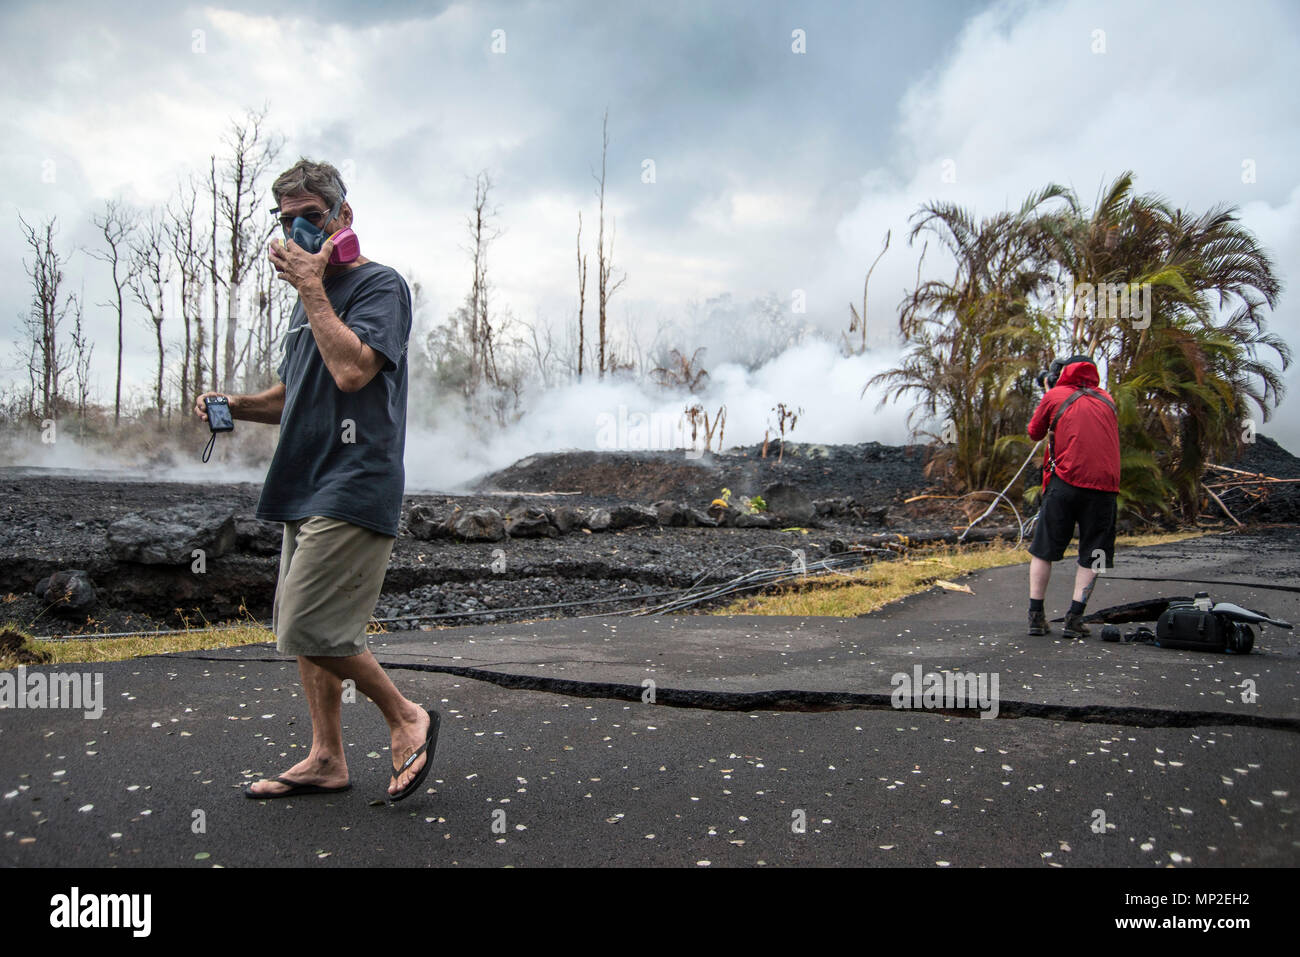 A resident wears a gas mask to protect from the harmful sulfur dioxide gases spewing from the Kilauea volcanic eruption May 18, 2018 in Pahoa, Hawaii. The recent eruption continues destroying homes, forcing evacuations and spewing lava and poison gas on the Big Island of Hawaii. Stock Photo